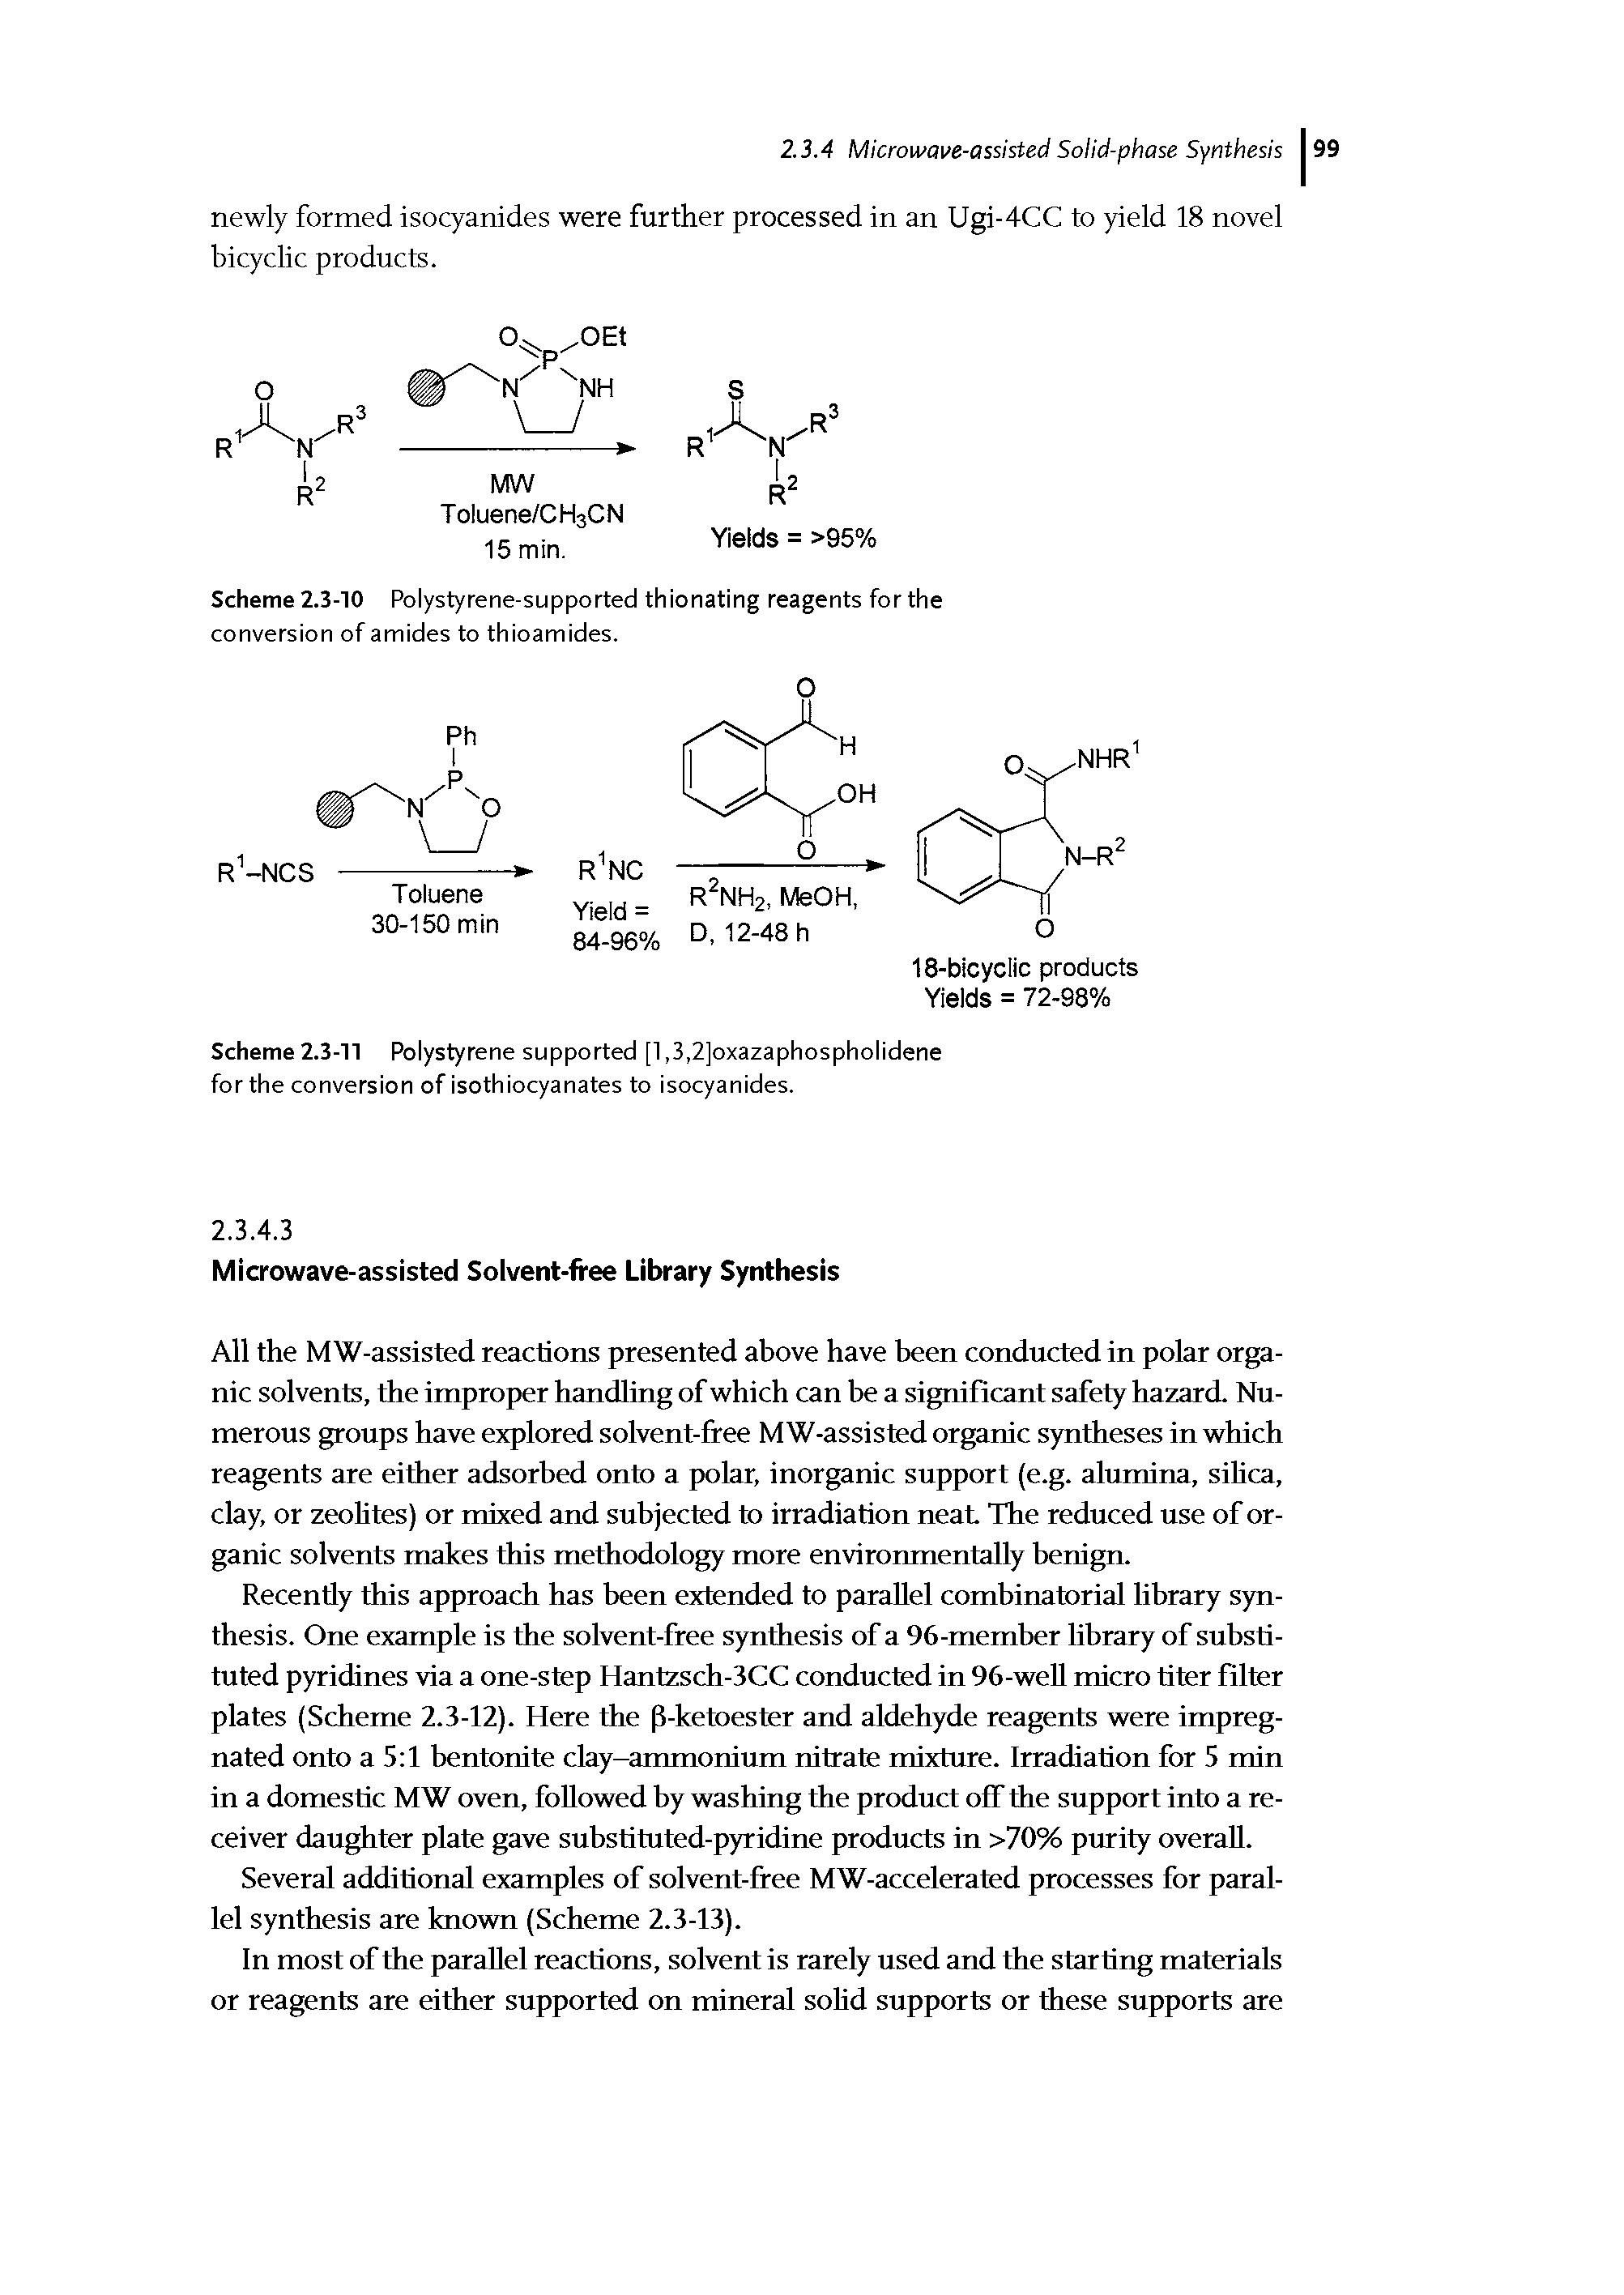 Scheme 2.3-10 Polystyrene-supported thionating reagents for the conversion of amides to thioamides.